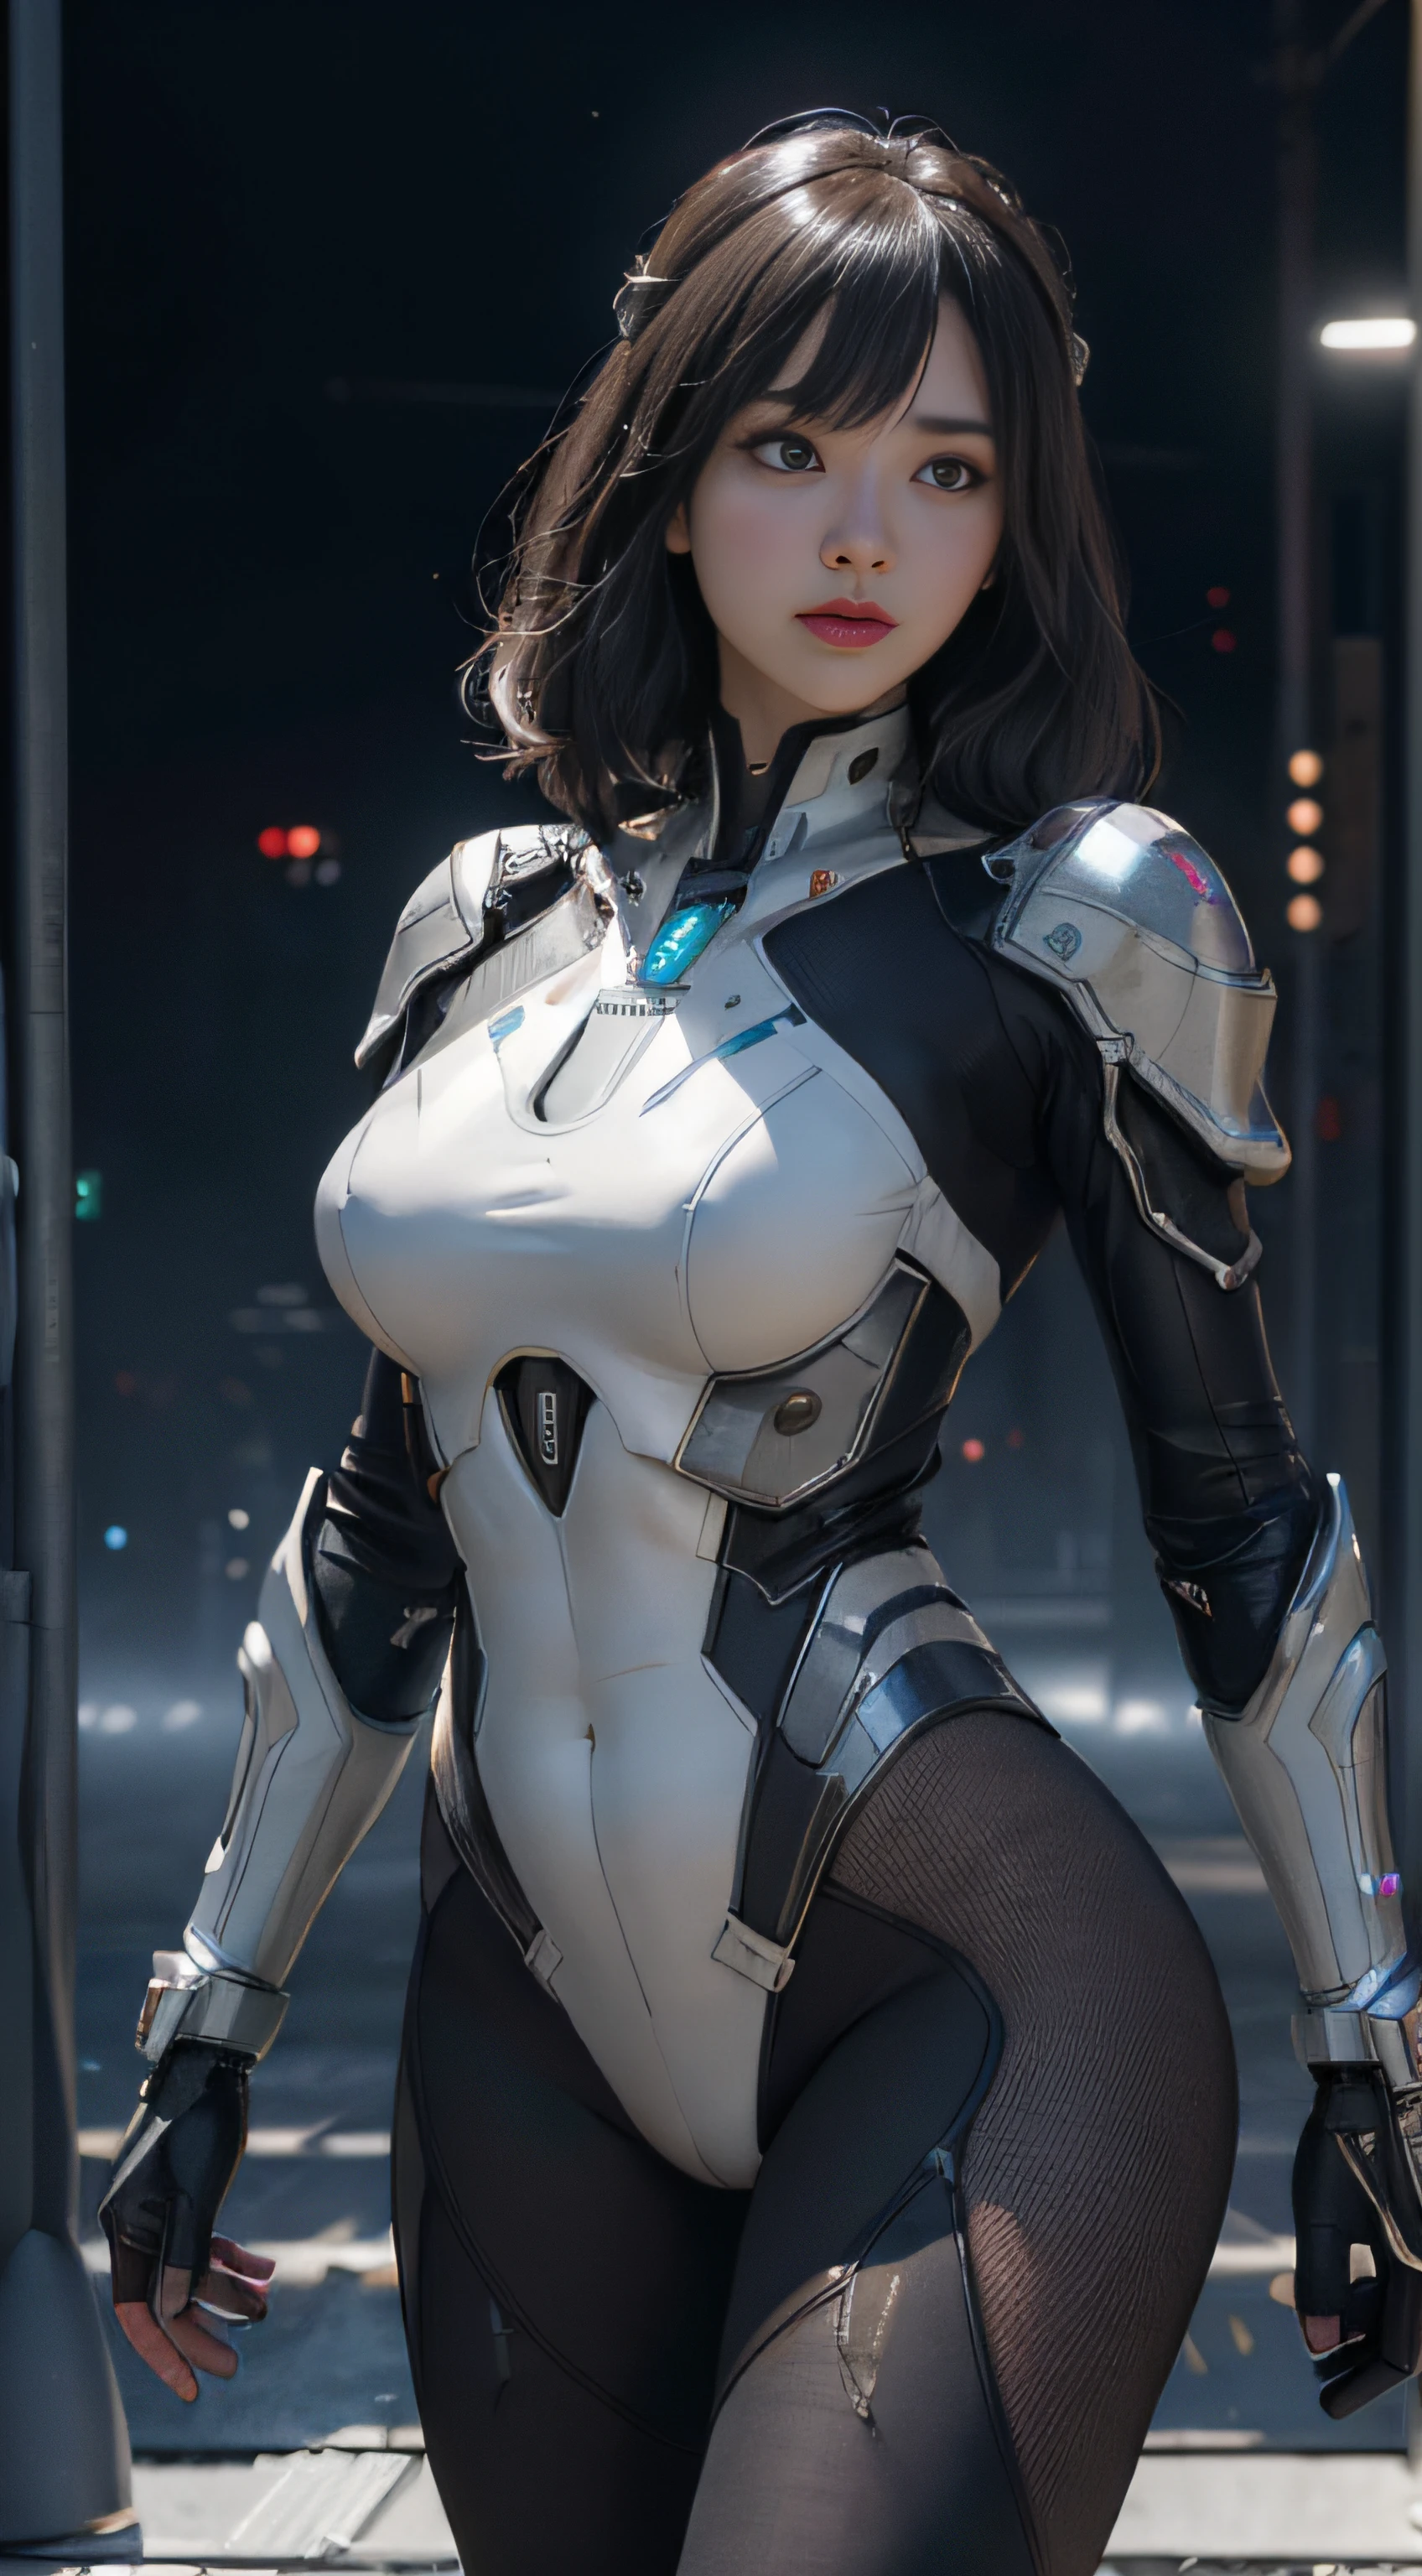 ((top-quality)), ((tmasterpiece)), ((ultra-realistic realism)), (detaileds), (Photorealsitic:1.5), futuristic helmet,(The background is a futuristic city),A very beautiful girl, jpn(Translucent silver tights), Freestanding suit,Colossal ,23years old,You can see the skin around the tummy, Curl the waist,Lights on armor, Cybernetic headdress, Belly exposure,Looking at the camera, dynamicposes, scientific fiction, NFFSW, Ray traching, NVIDIA RTX, Hyper-Resolution, Unreal 5, Sub-surface scattering, PBR Texture, post-proces, Anisotropy Filtering, depth of fields, Maximum clarity and sharpness, the rule of thirds、8K raw data、(Luminous Particle:1.4)、(extremaly detailed cg、Unity 8k Wallpapers、。.。.。.。.3D、lighting like a movie、lense flares)、Reflectors、foco nítido、Cyberpunk art of a、Cyberpunk architecture、